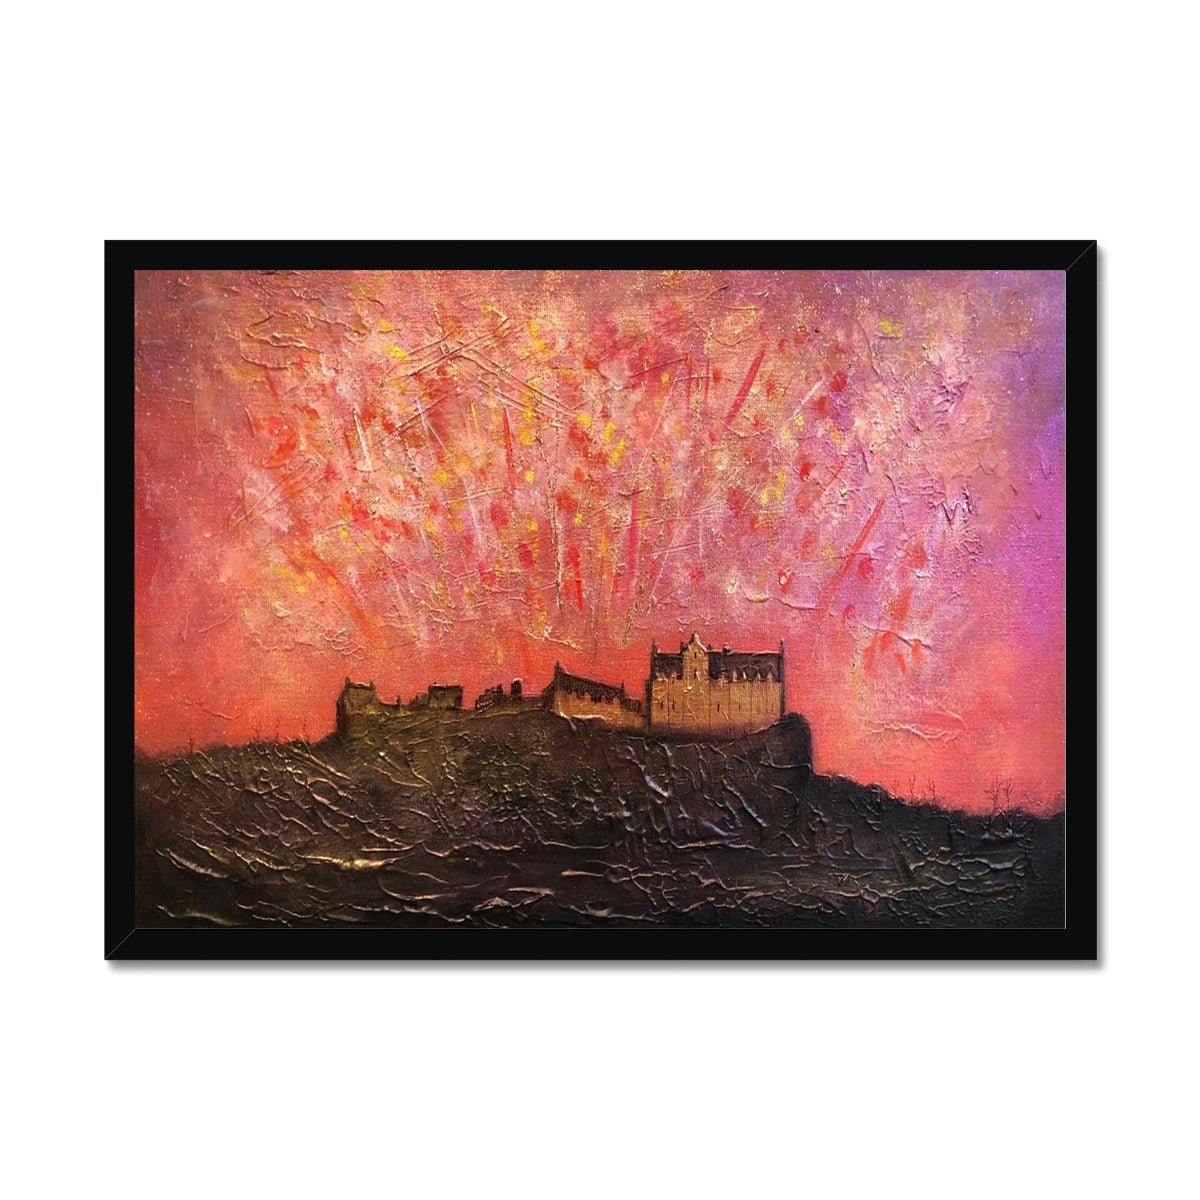 Edinburgh Castle Fireworks Painting | Framed Prints From Scotland-Framed Prints-Historic & Iconic Scotland Art Gallery-Paintings, Prints, Homeware, Art Gifts From Scotland By Scottish Artist Kevin Hunter